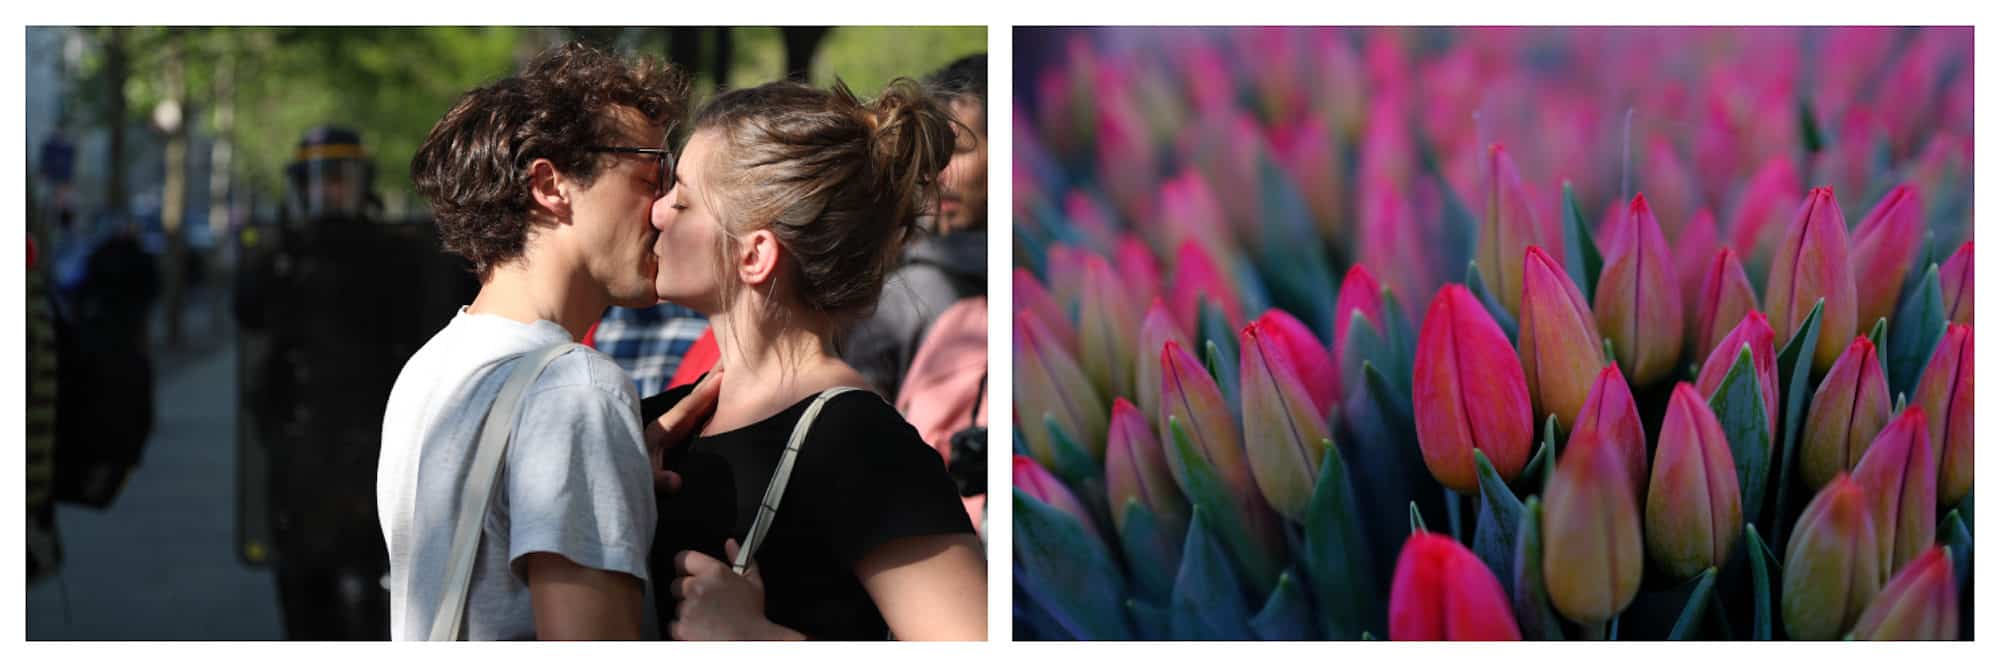 A couple in love kissing on the streets of Paris (left) and beautiful pink tulips on a flower stand in Paris on Valentine's Day (right).